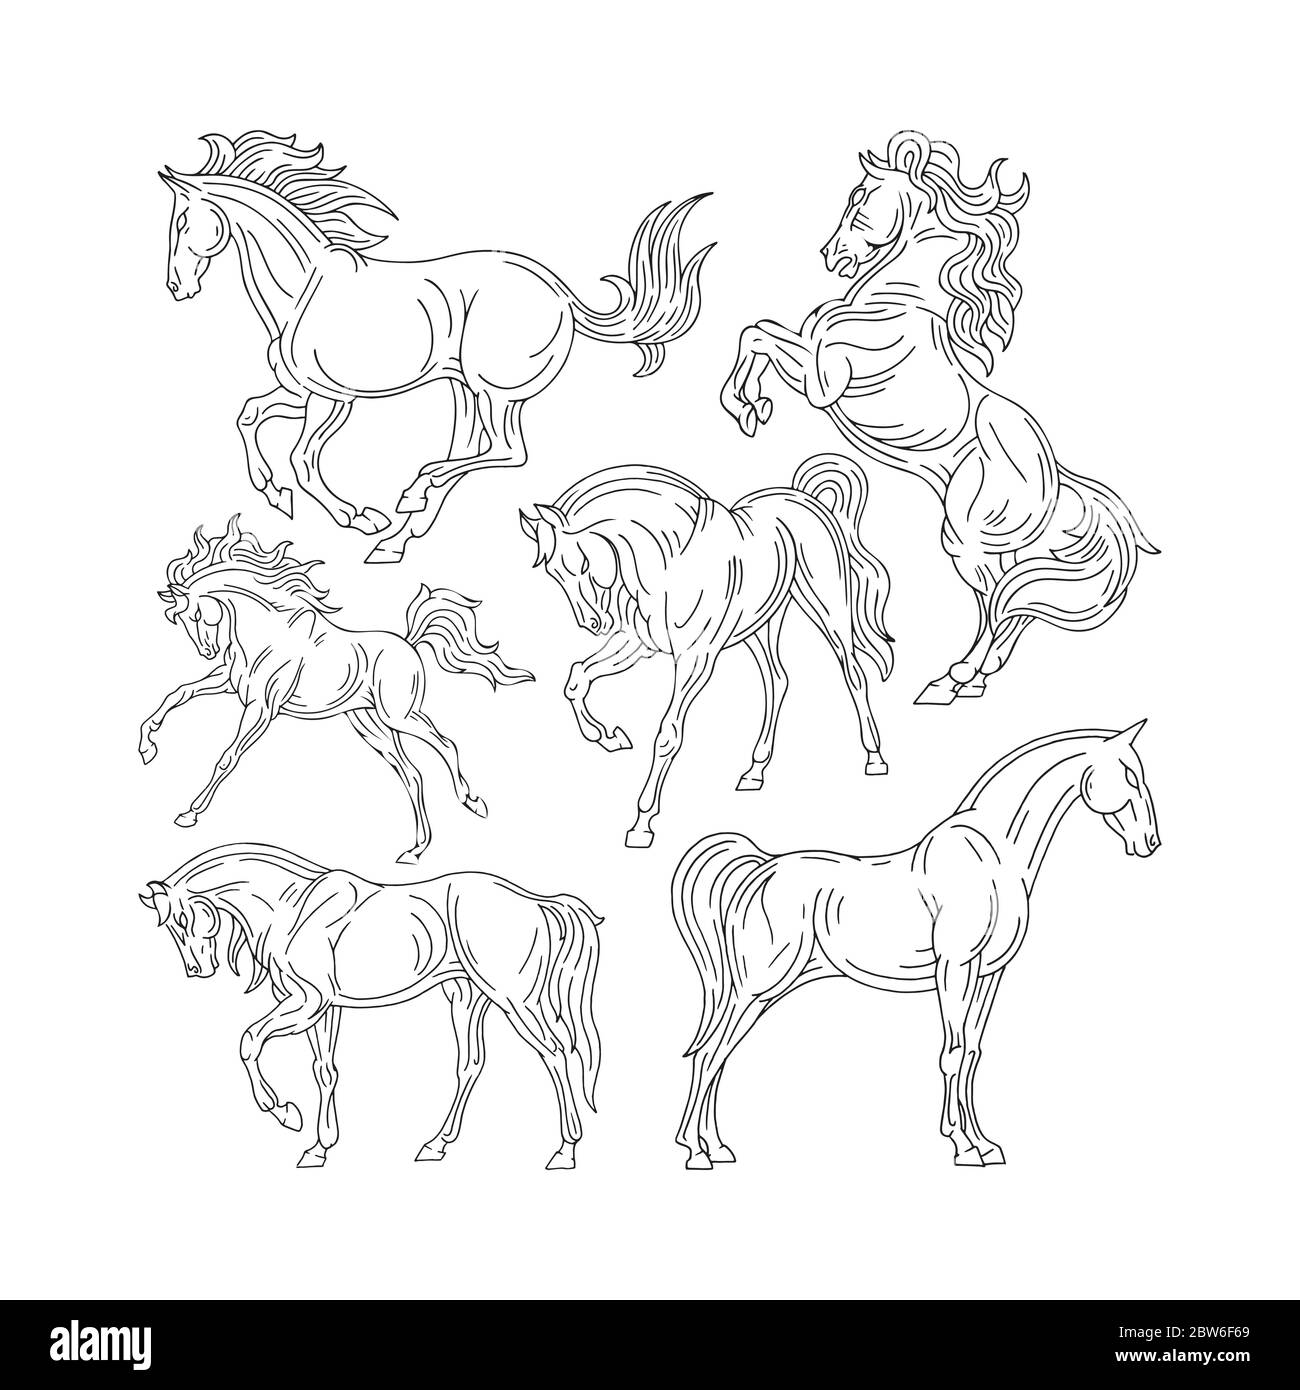 Kindred Spirit Horse Riding Poses for Genesis 9 and Daz Horse 3 | 3d Models  for Daz Studio and Poser